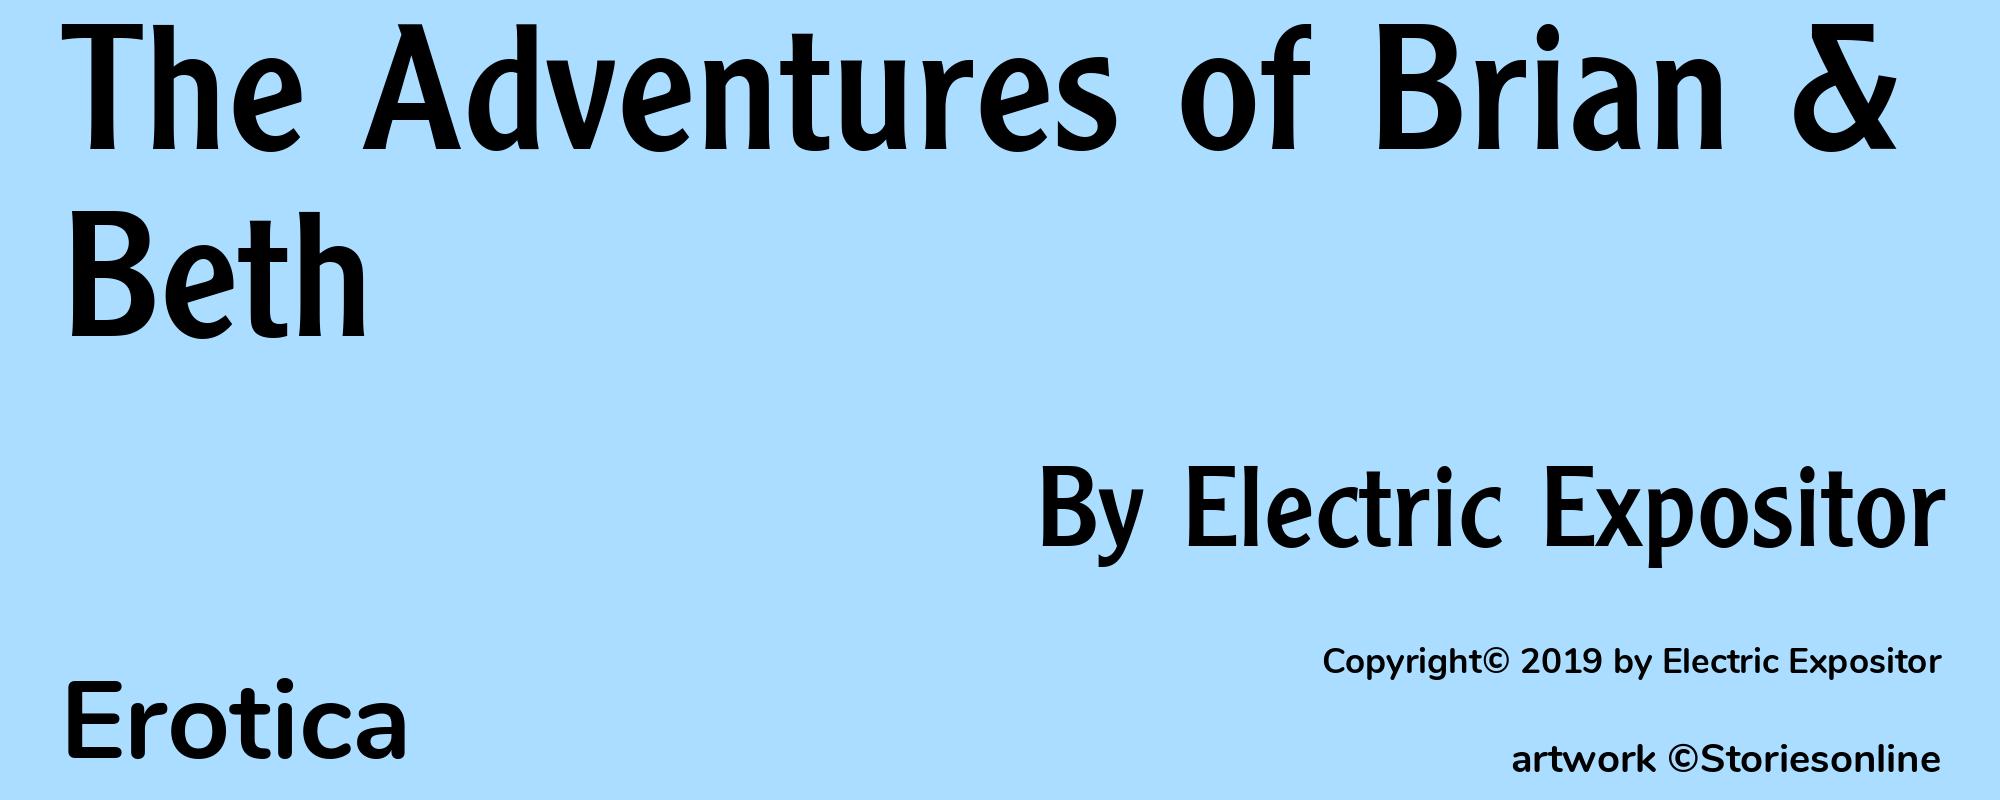 The Adventures of Brian & Beth - Cover